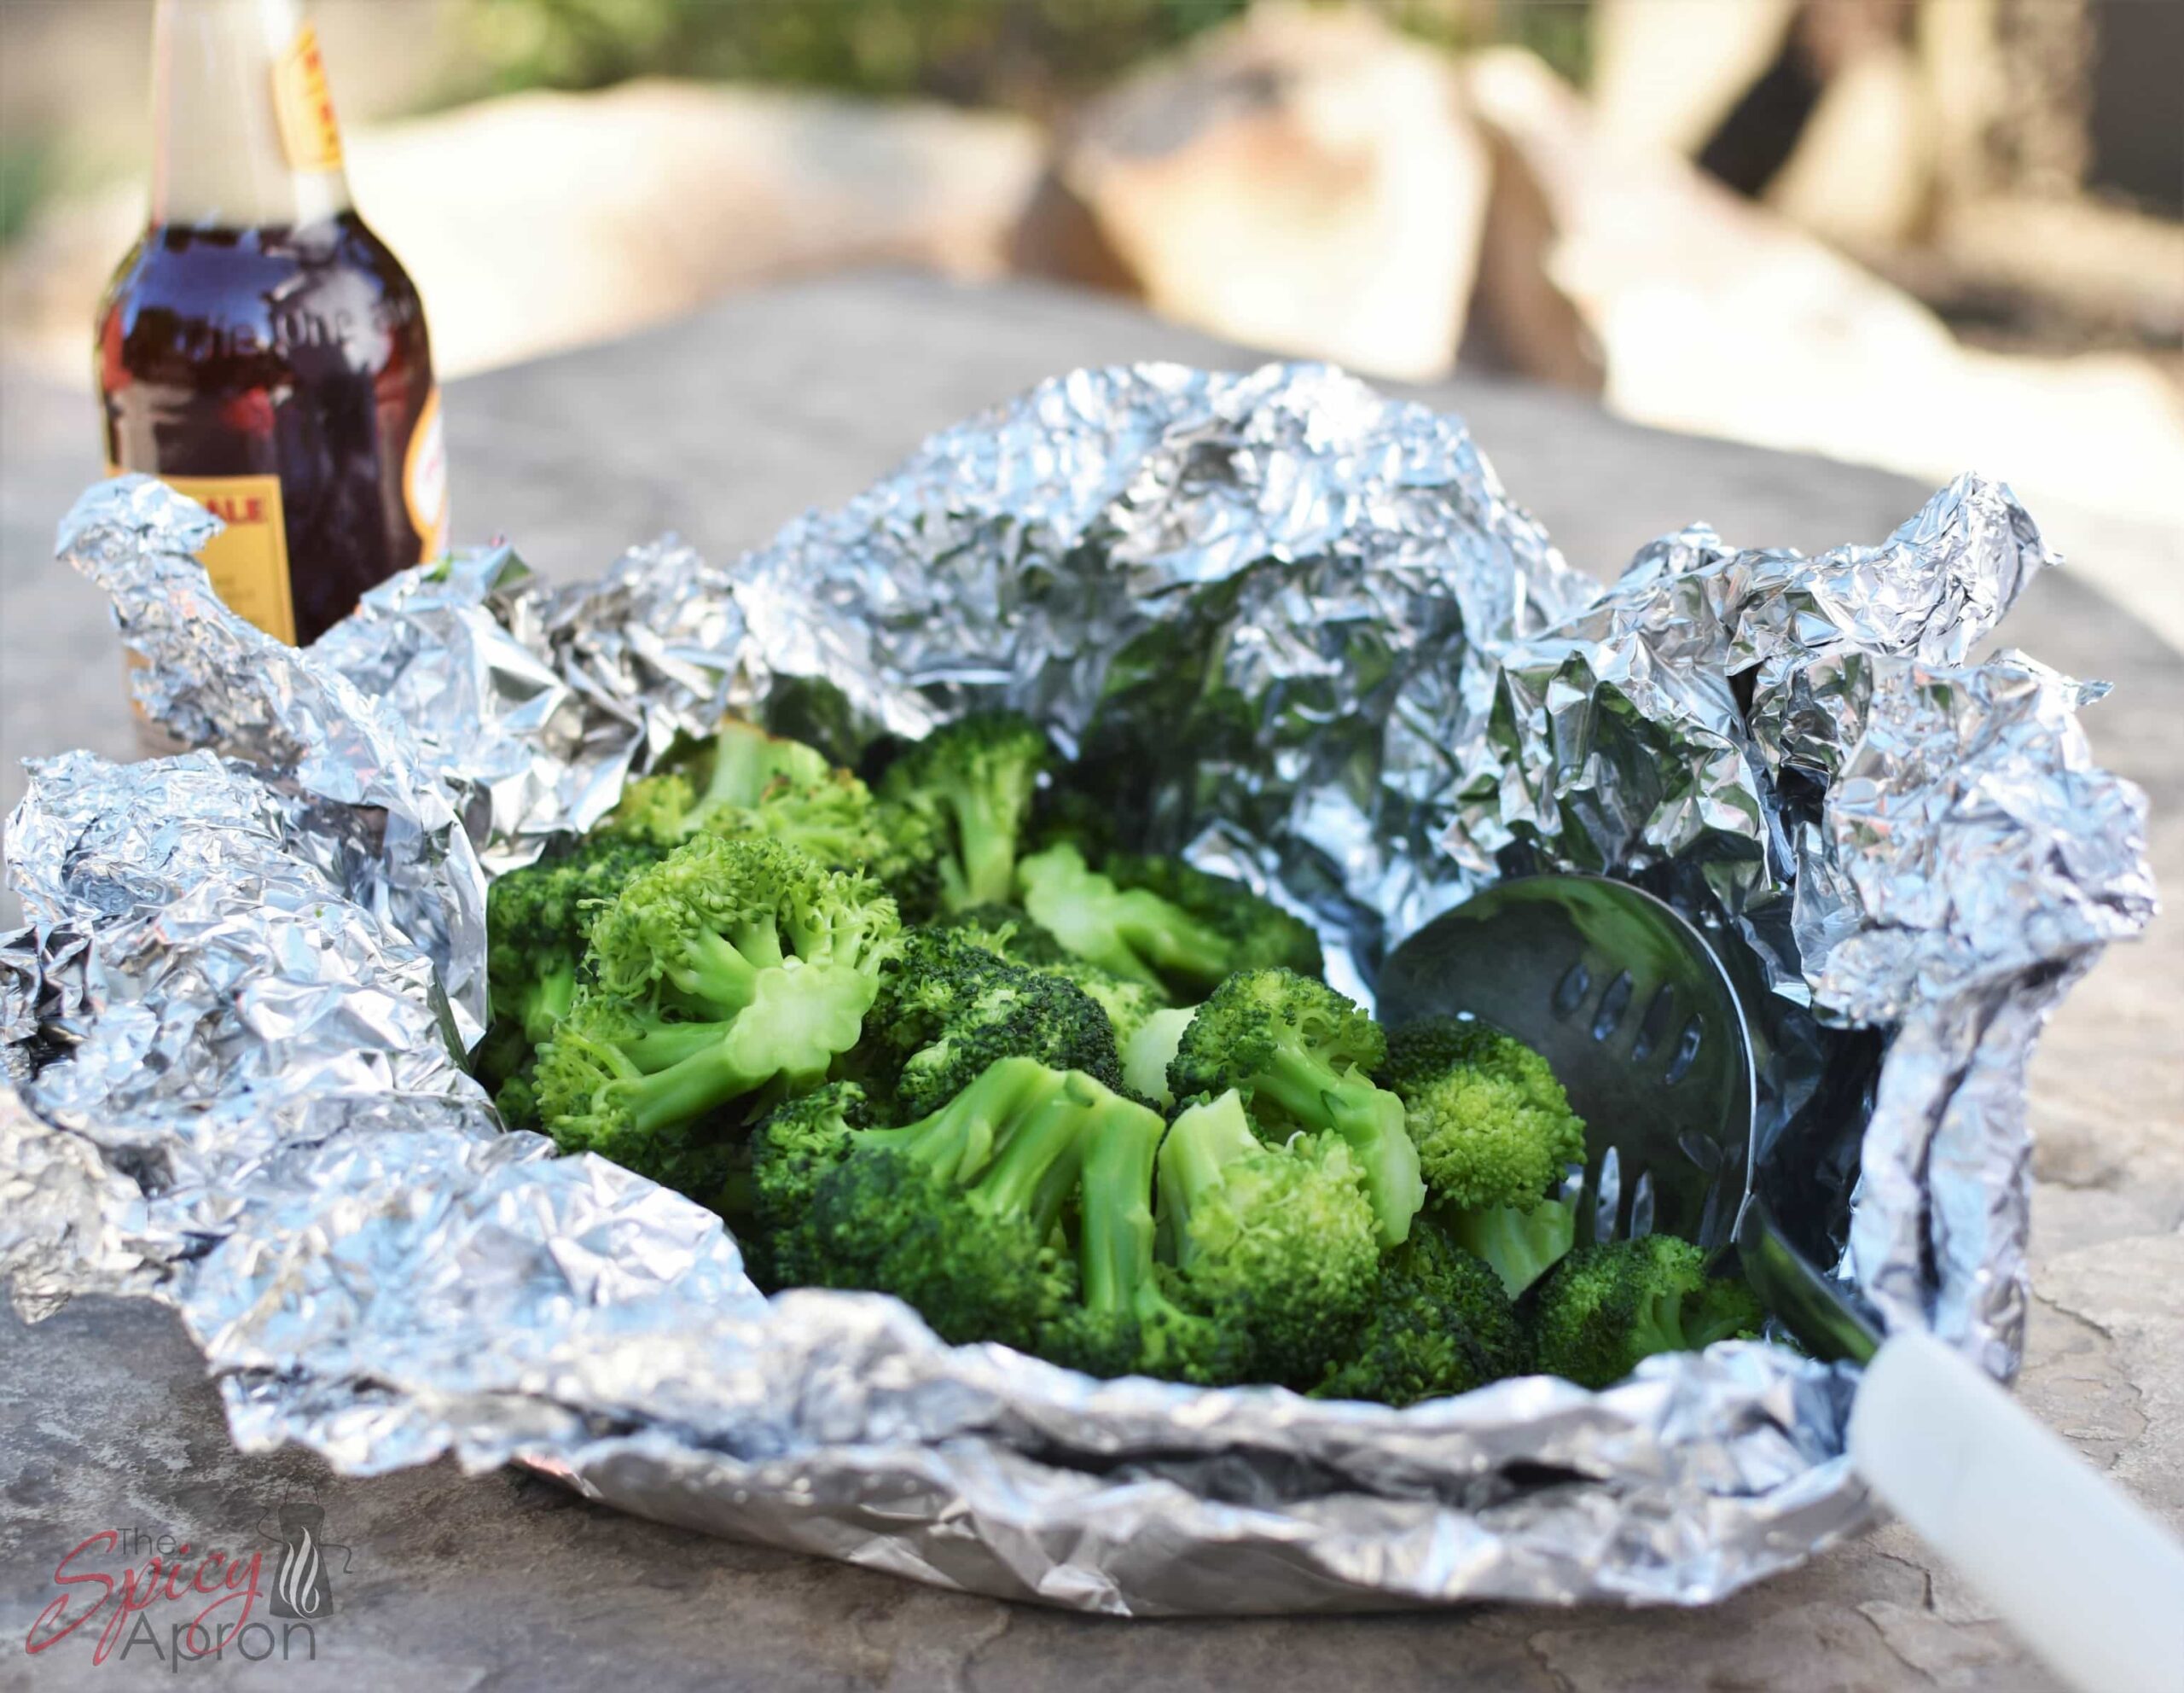 How to Make Fresh Steamed Broccoli When Camping